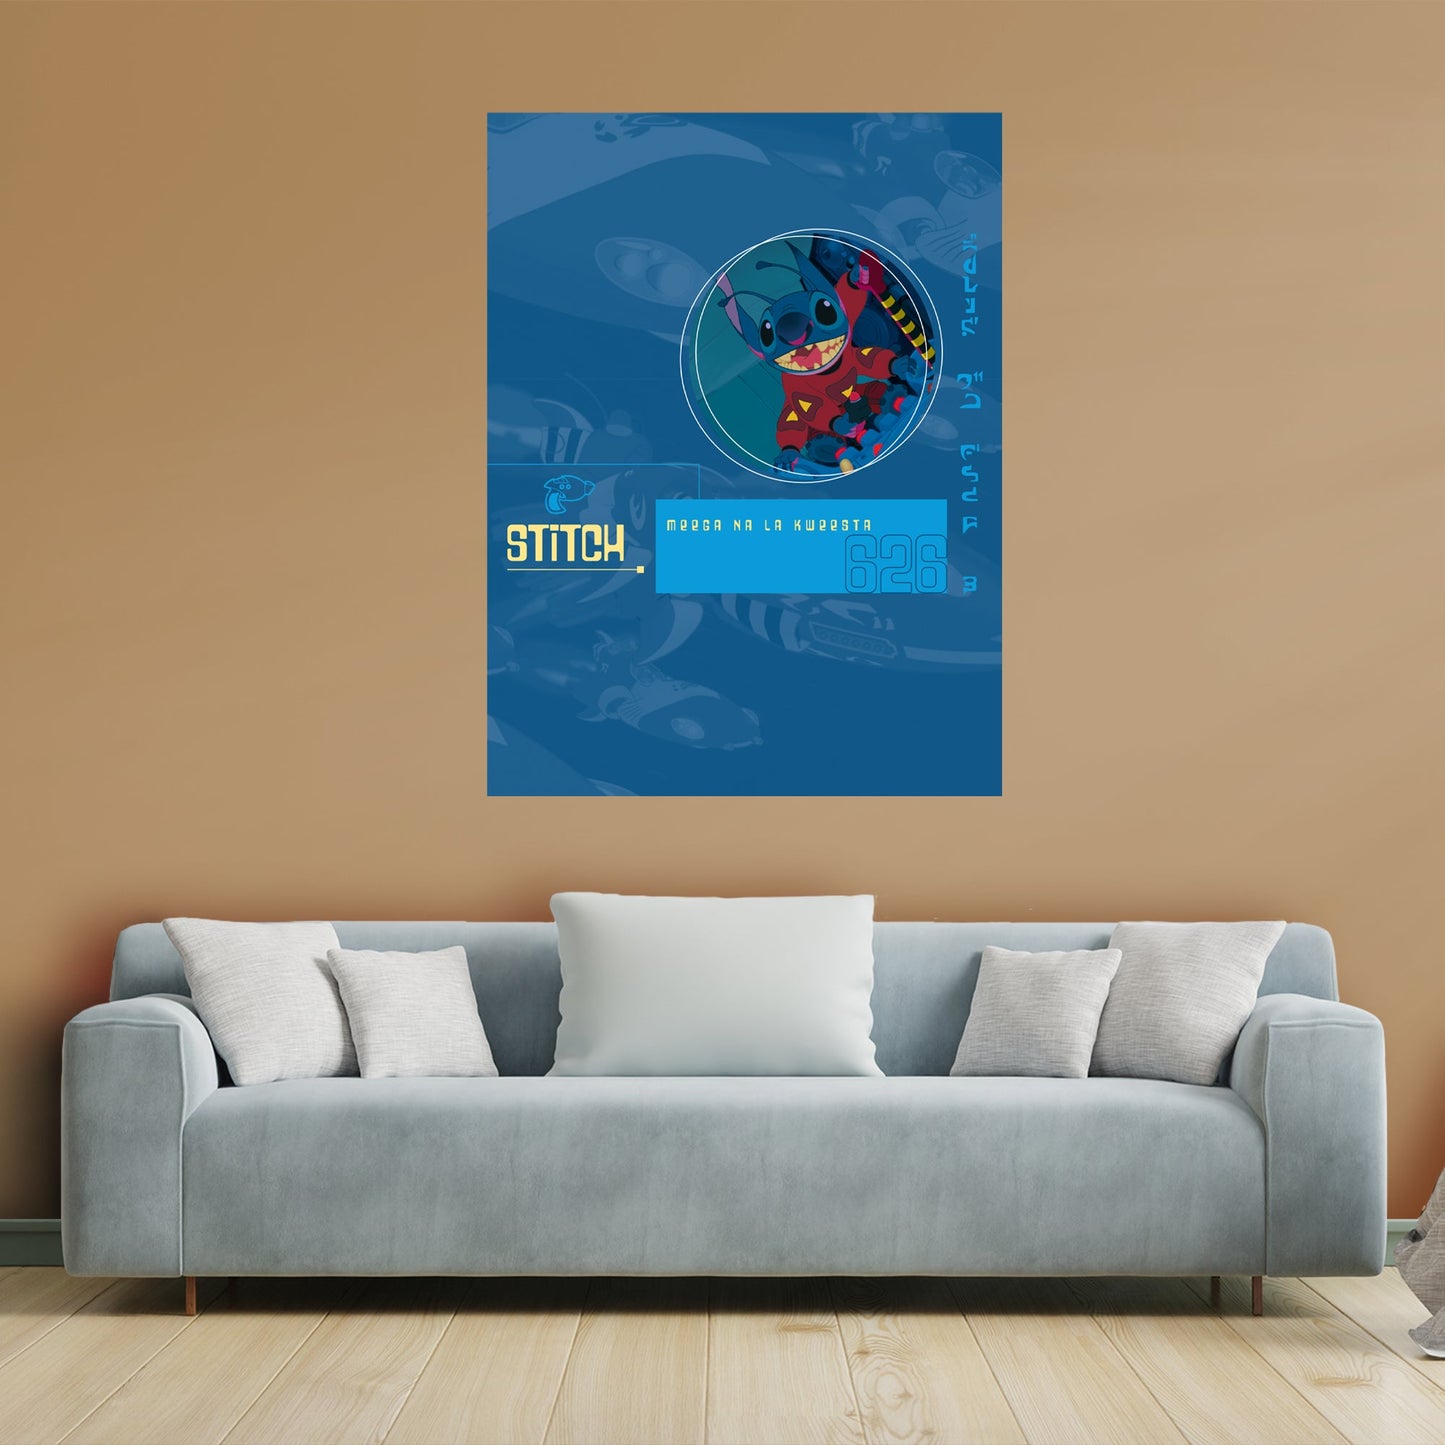 Lilo & Stitch: Stitch 626 Stitch Spaceship Mural - Officially Licensed Disney Removable Adhesive Decal